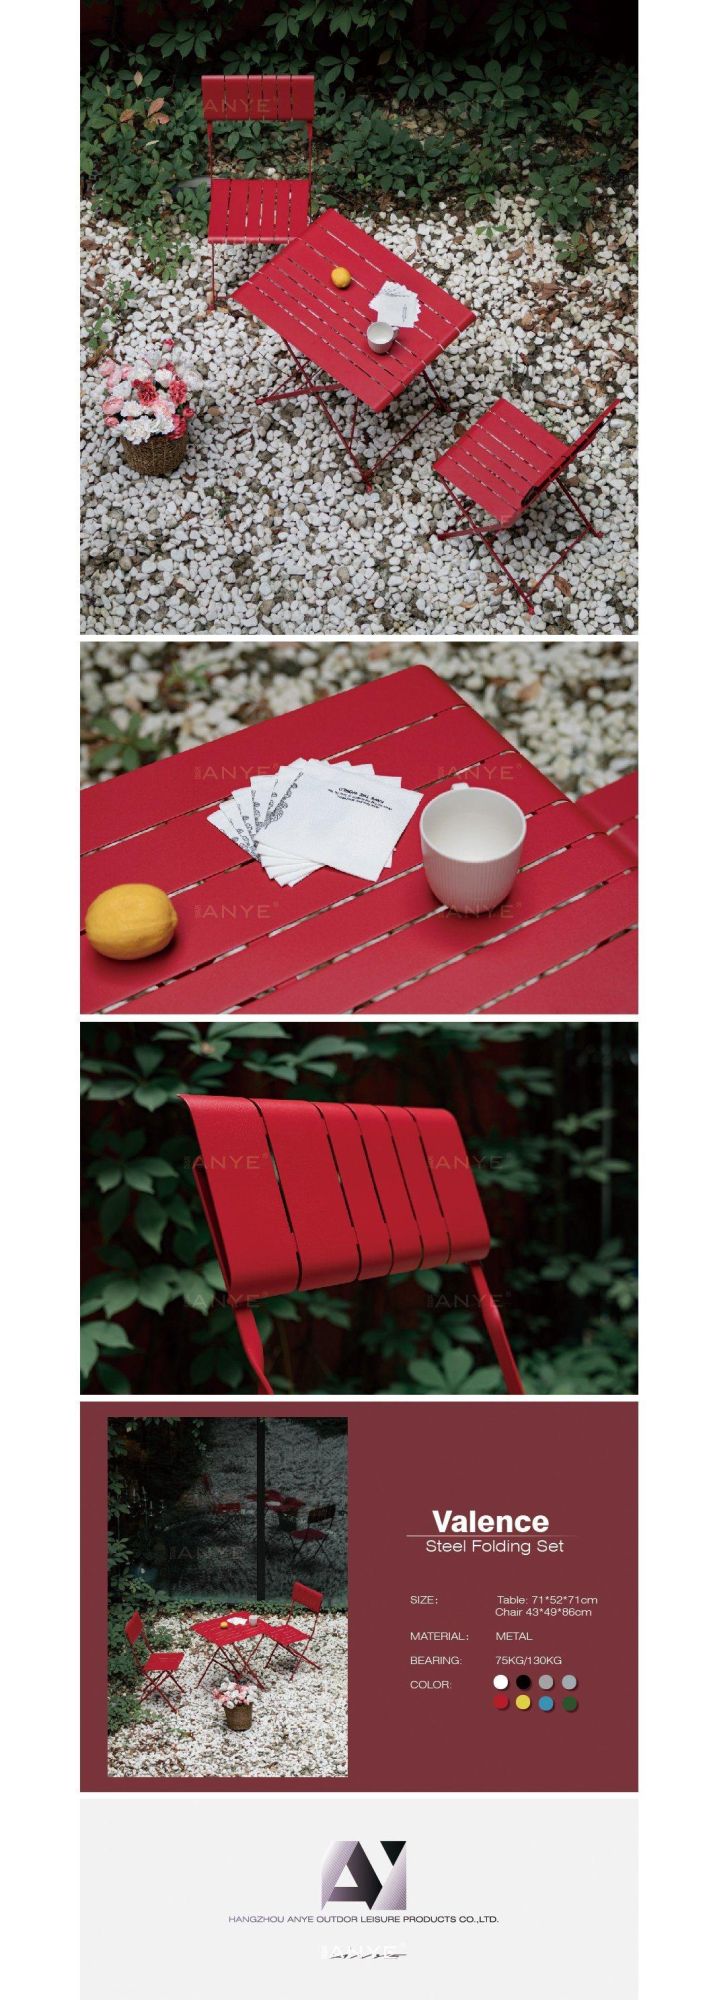 Courtyard Furniture Rust Resistant Outdoor Foldable Coffee Table and Chair Modern Dining Furniture